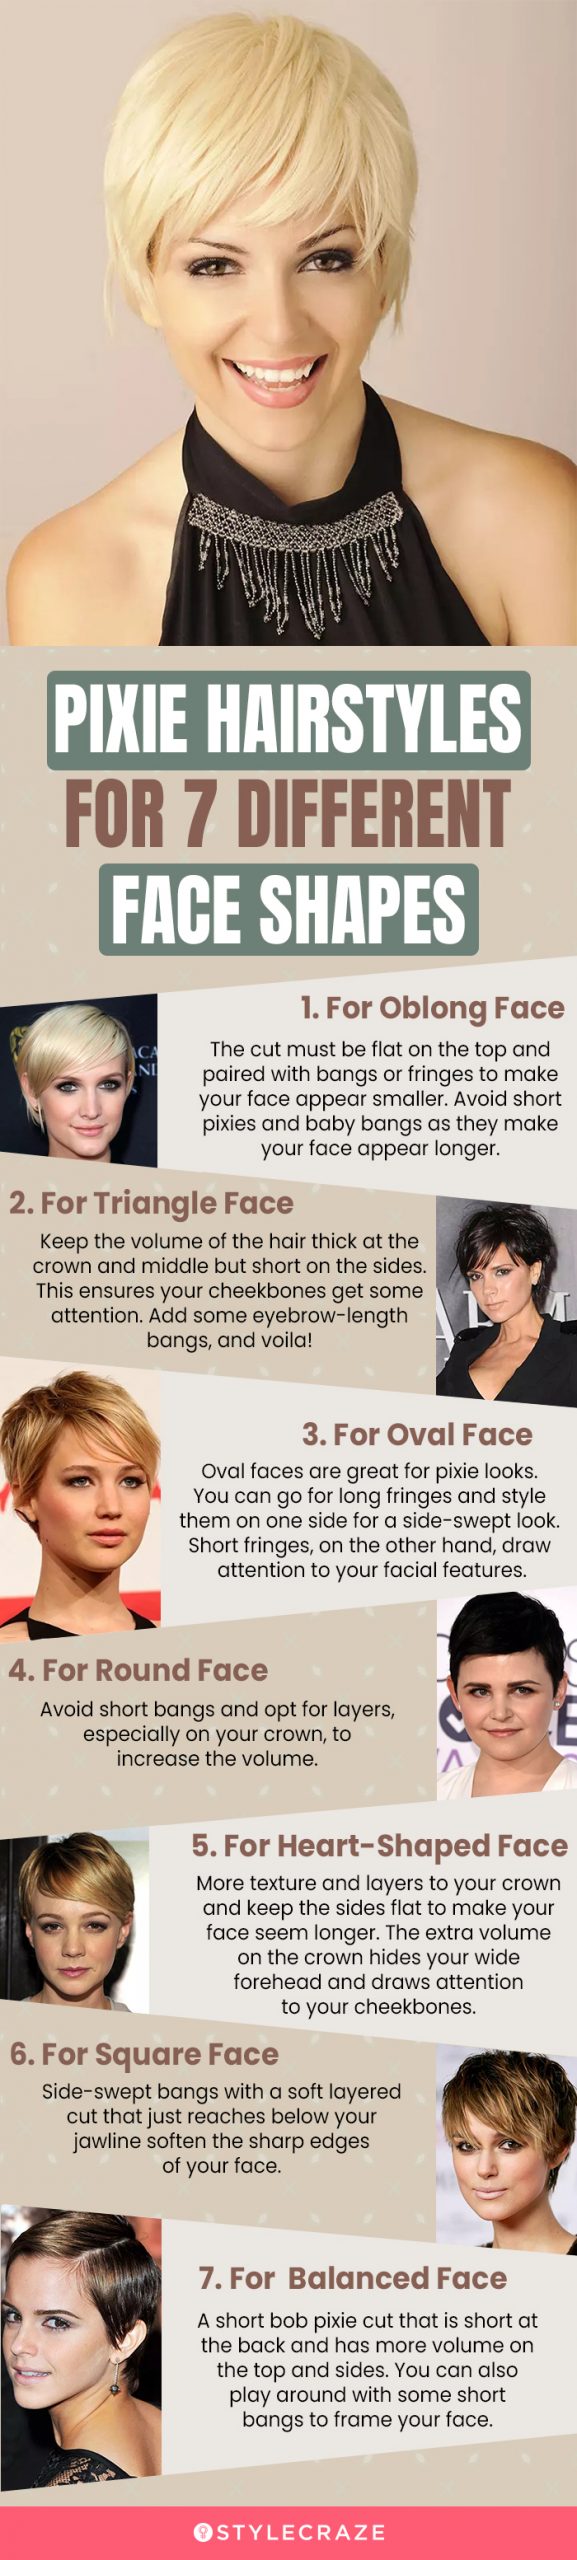 Short hair styles: find the best bob for your face shape and hair type